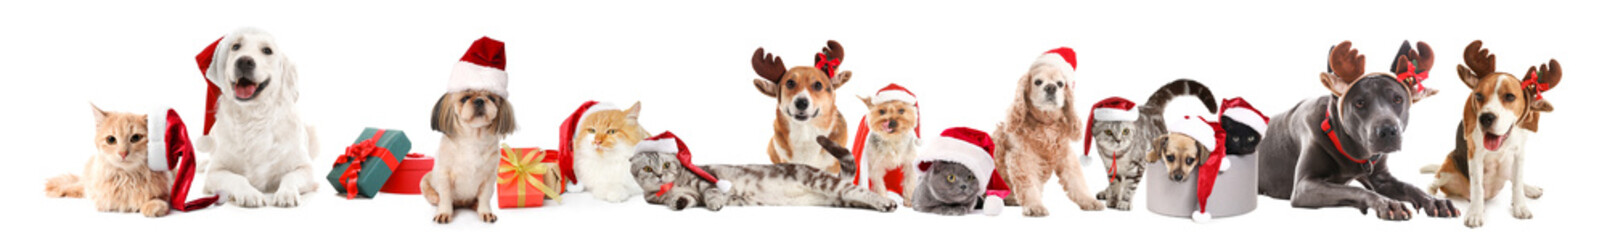 Cute funny animals with Christmas decor on white background